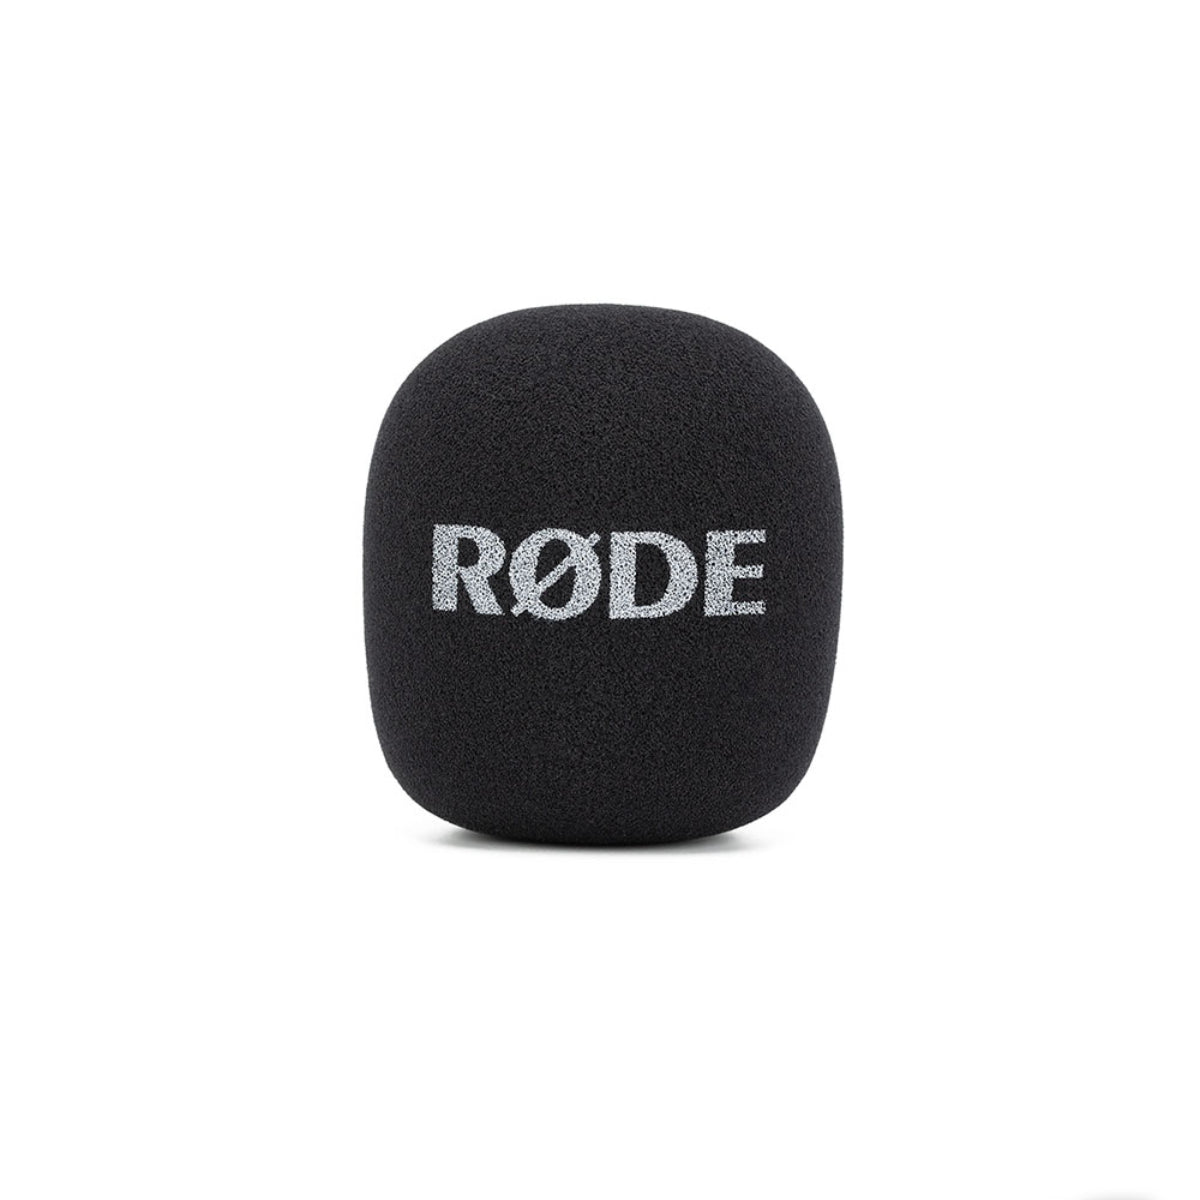 Rode Interview "GO" HANDLE & POP FILTER ATTACHMENT FOR WIRELESS "GO" SYSTEM